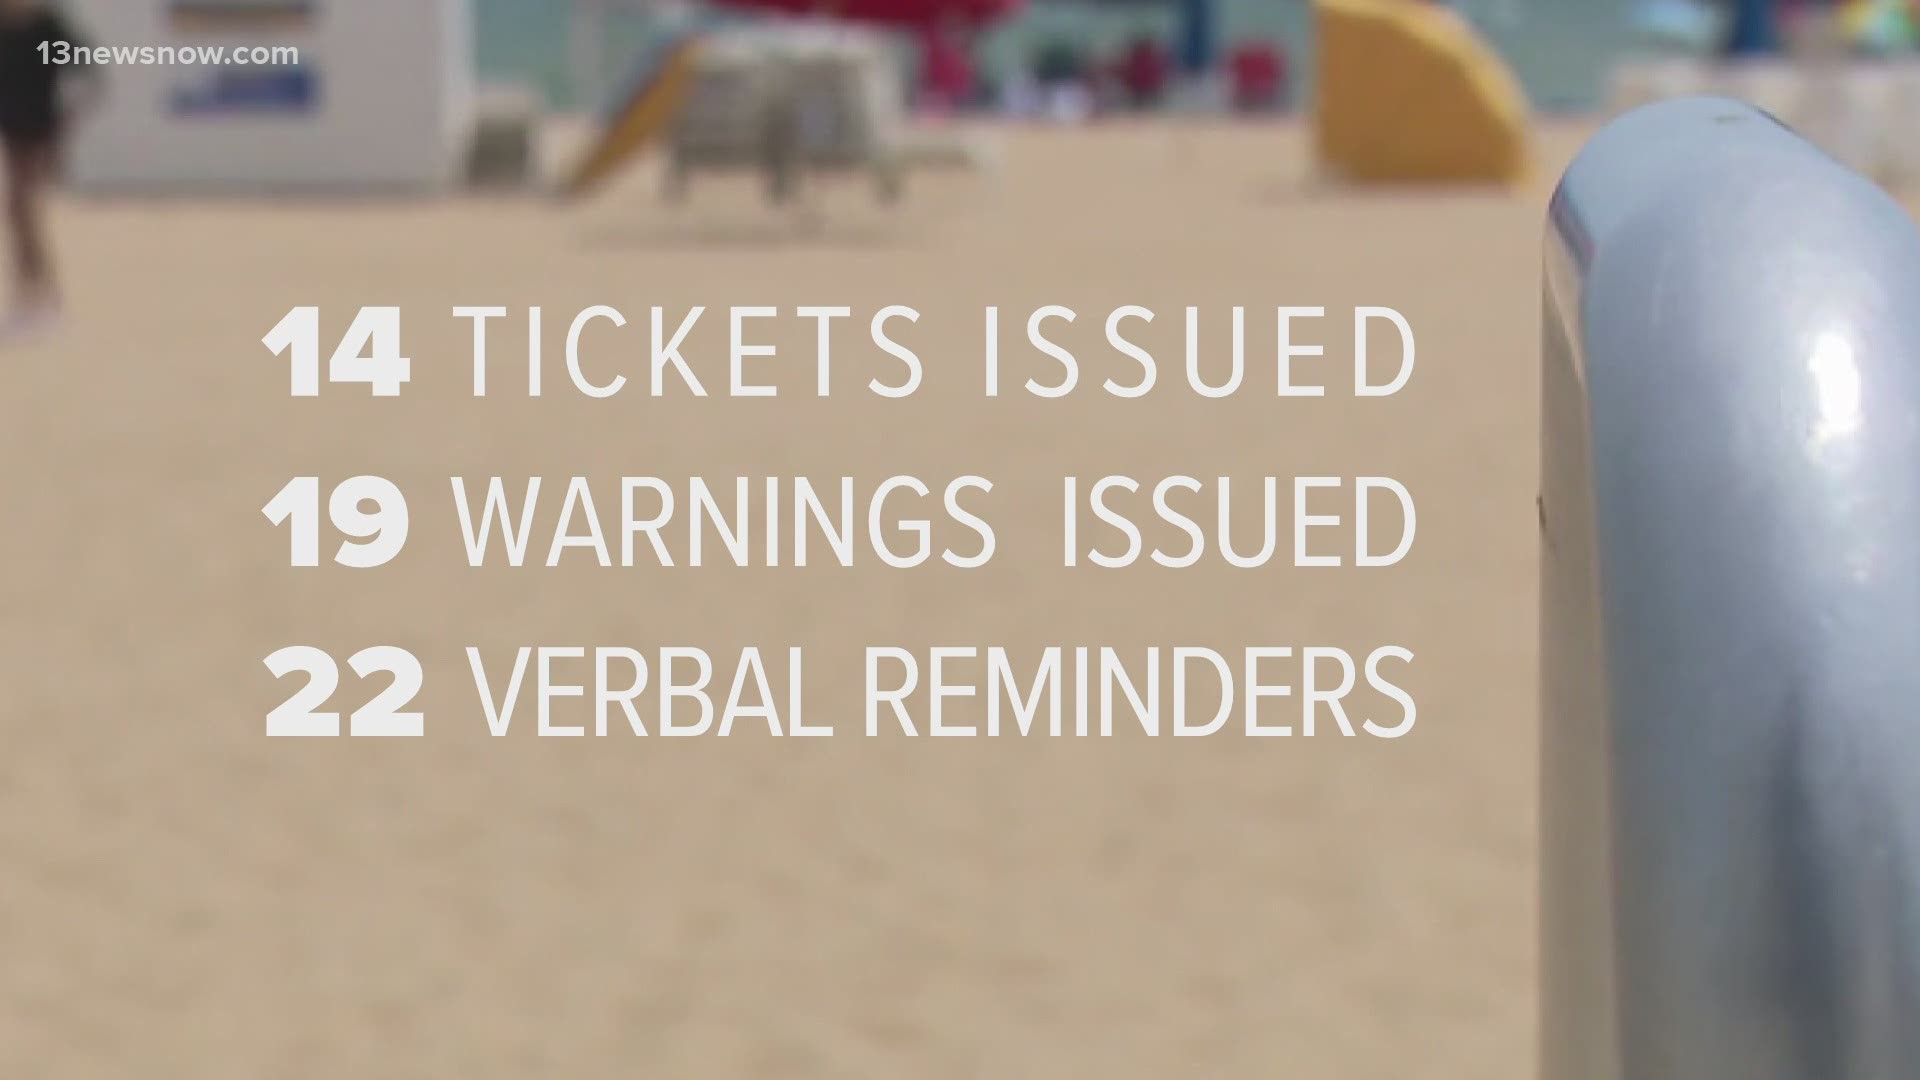 Virginia Beach Animal Control reminded visitors that dogs are not allowed on the sand at beaches from between 10 a.m. and 6 p.m. It's too hot for their paws.